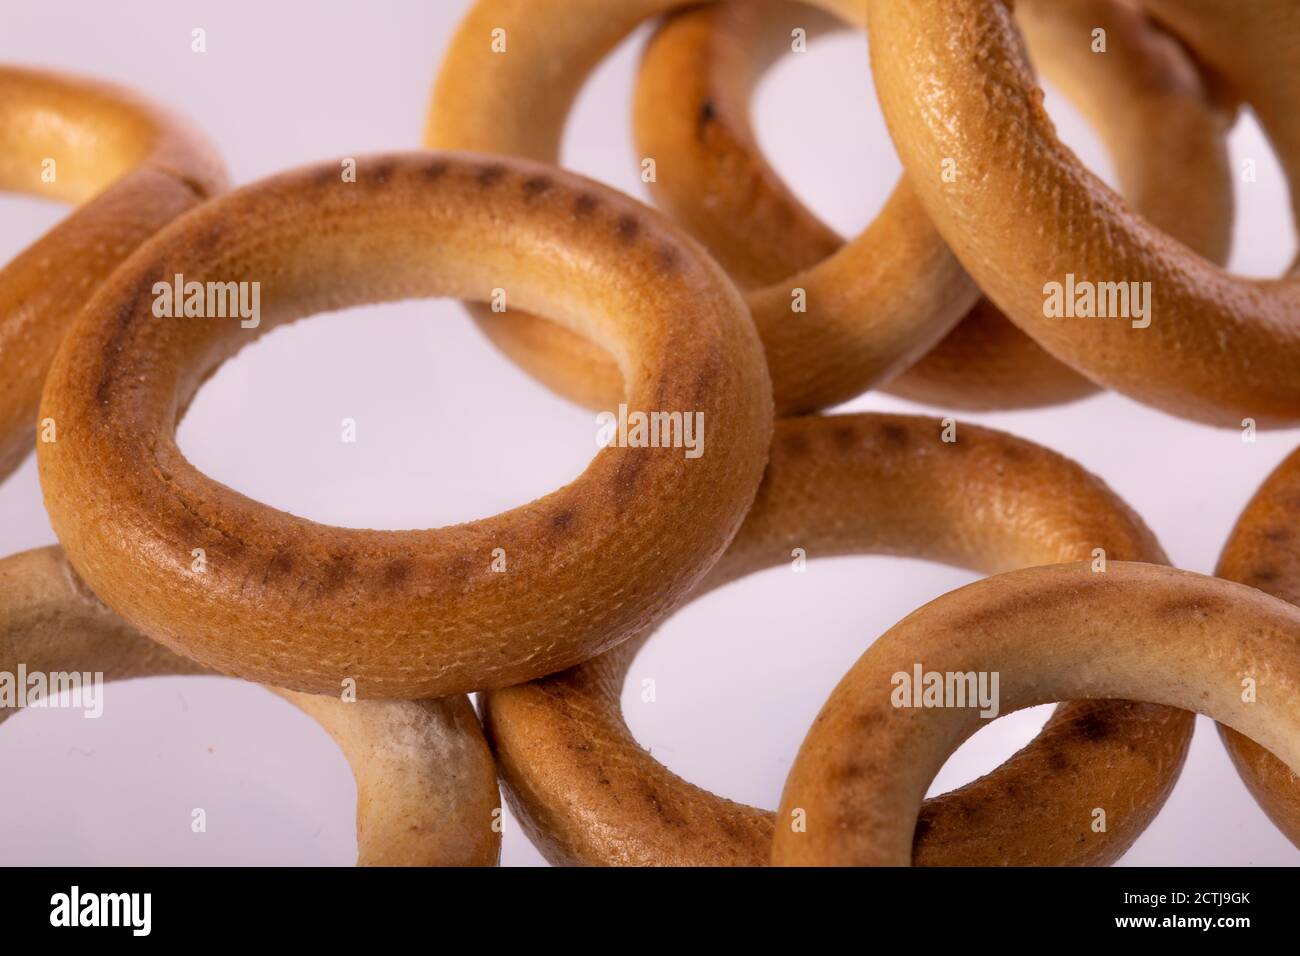 Macro shot of bagels on light background. Bakery products, dense bread rolls Stock Photo